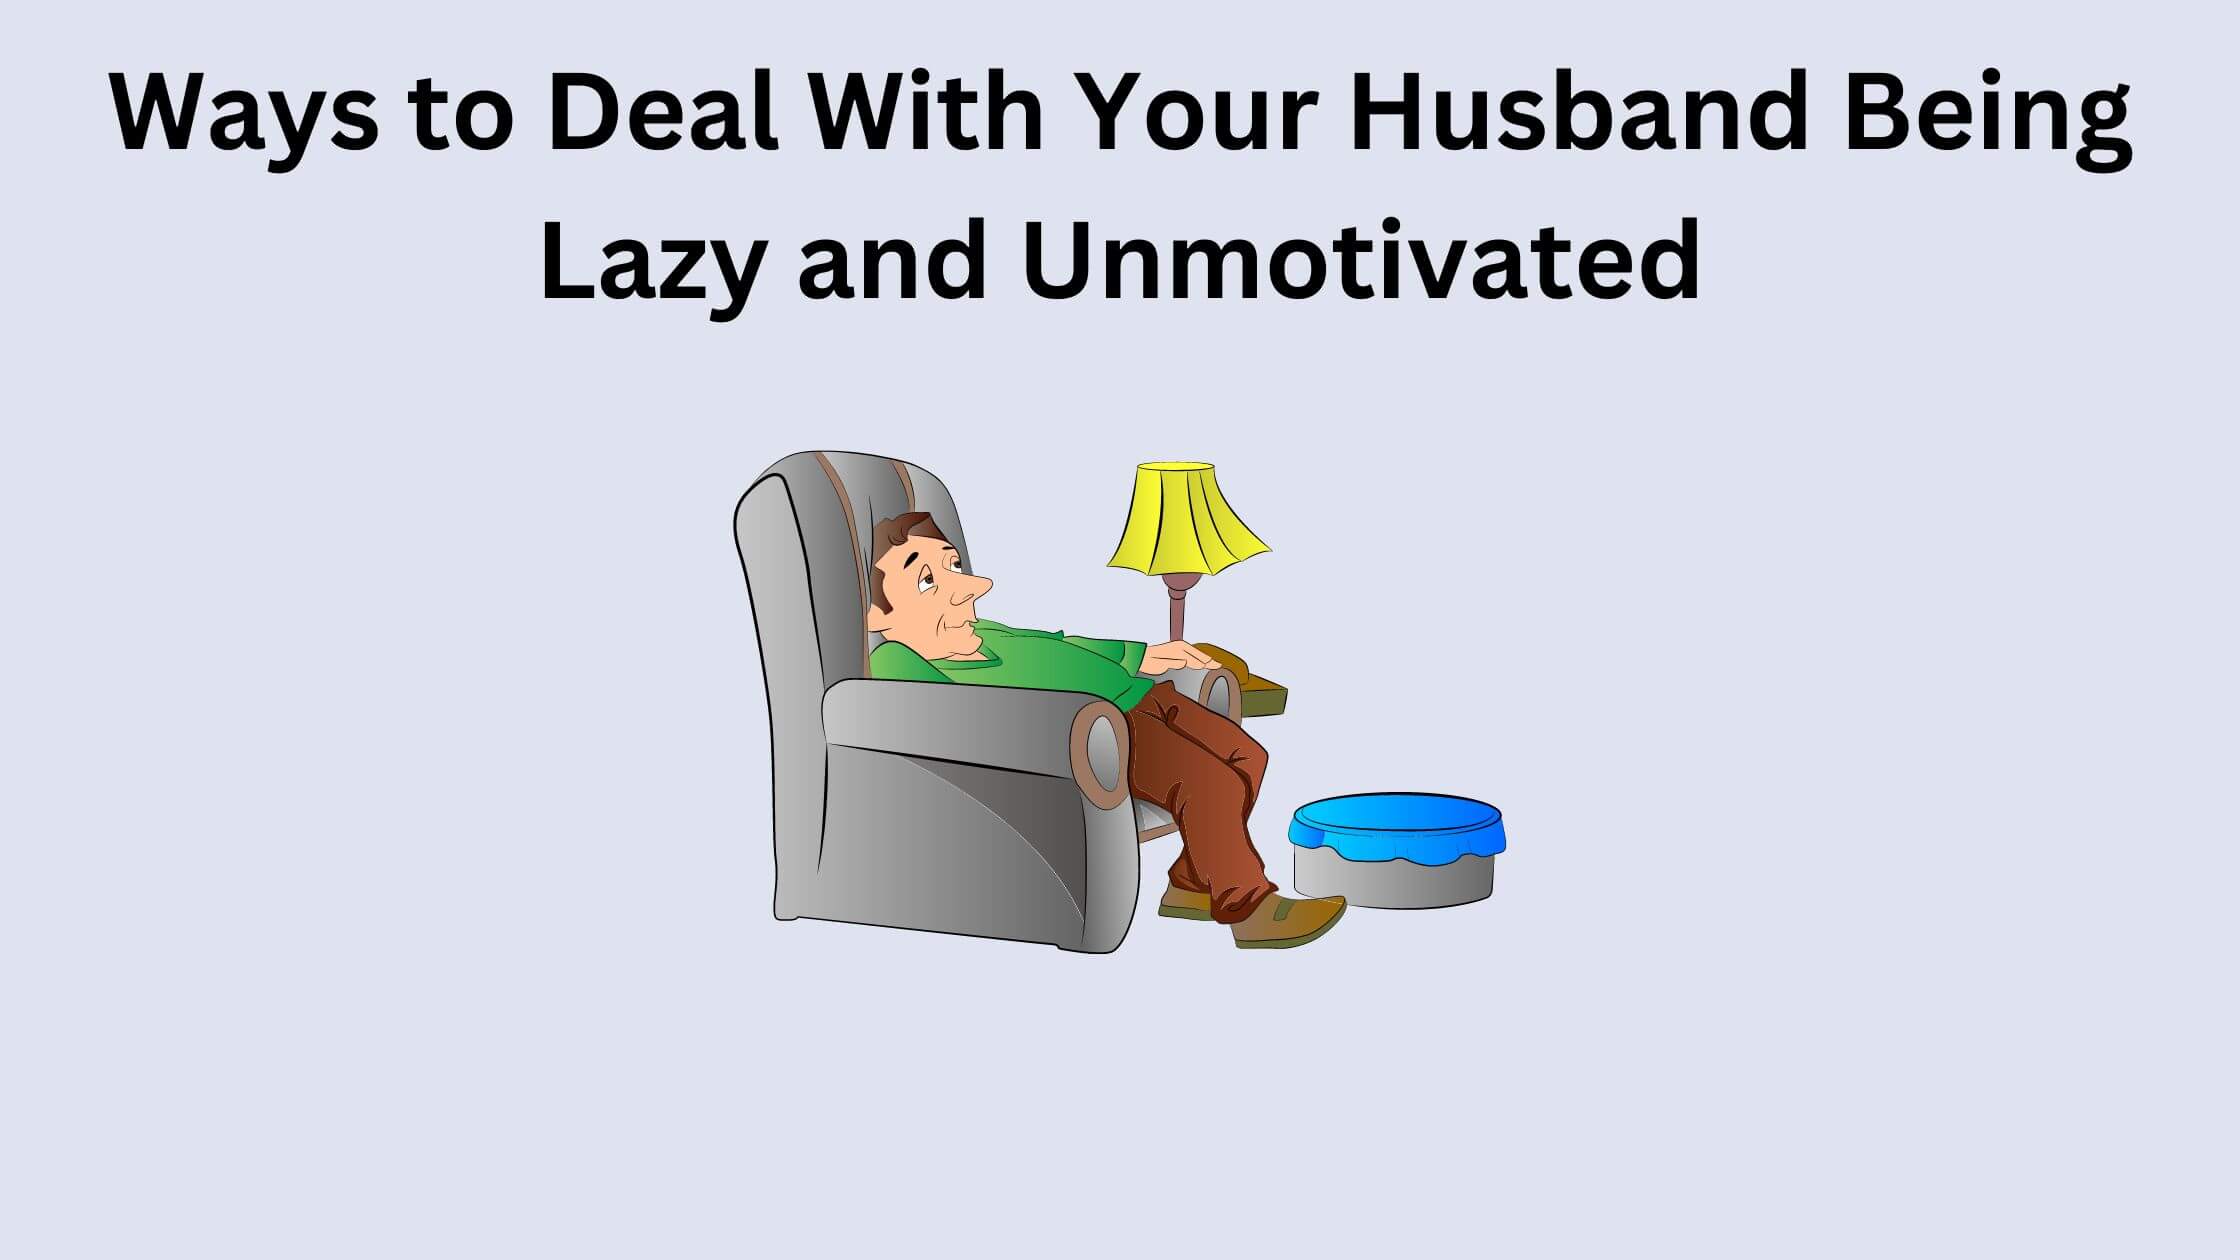 Tips to Deal With Your Husband Being Lazy and Unmotivated